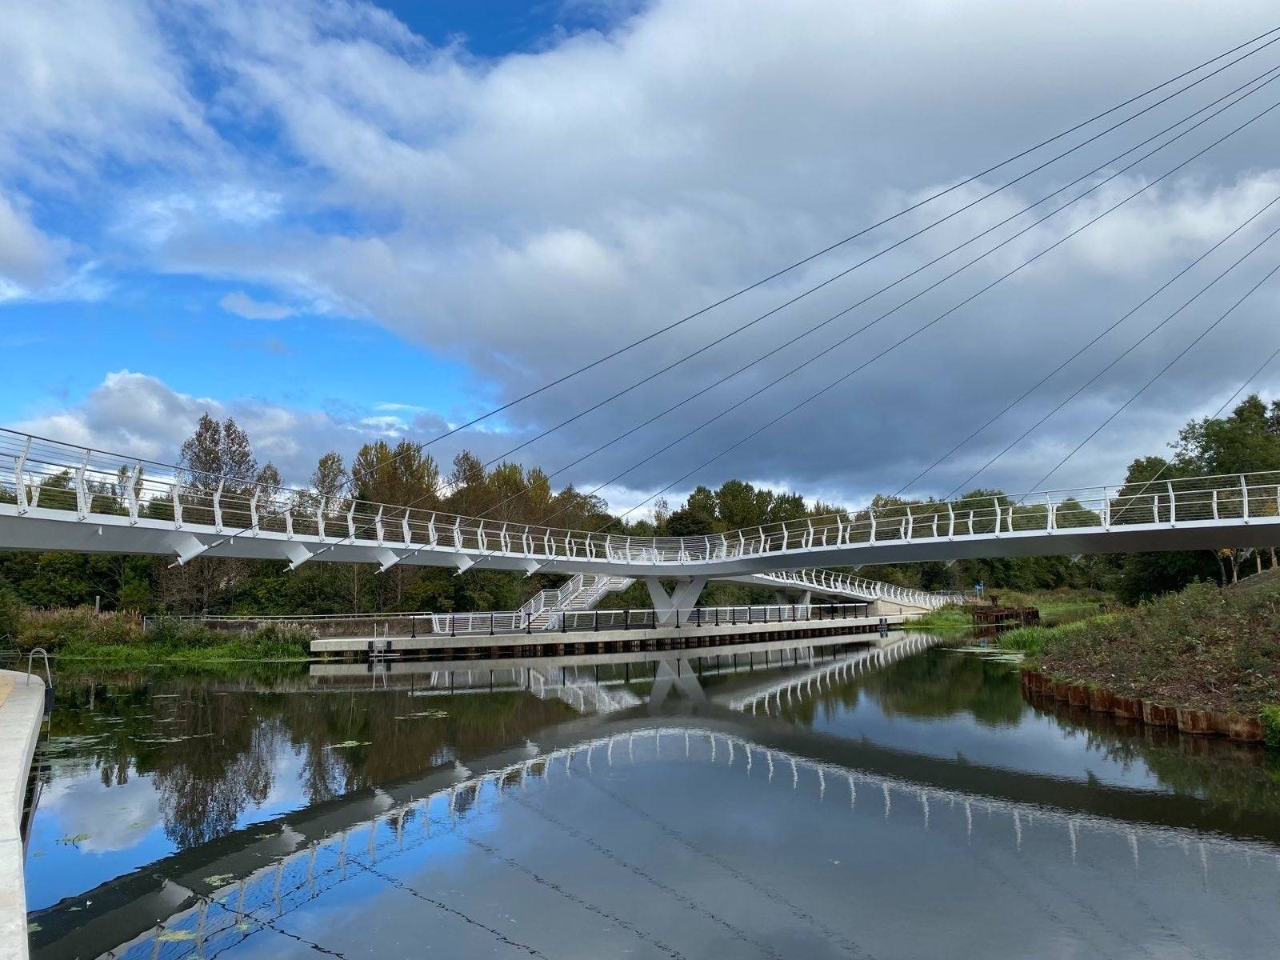 stockingfield bridge, a curved white bridge over the forth and clyde canal in maryhill, glasgow, with blue sky and clouds above, reflected in the water